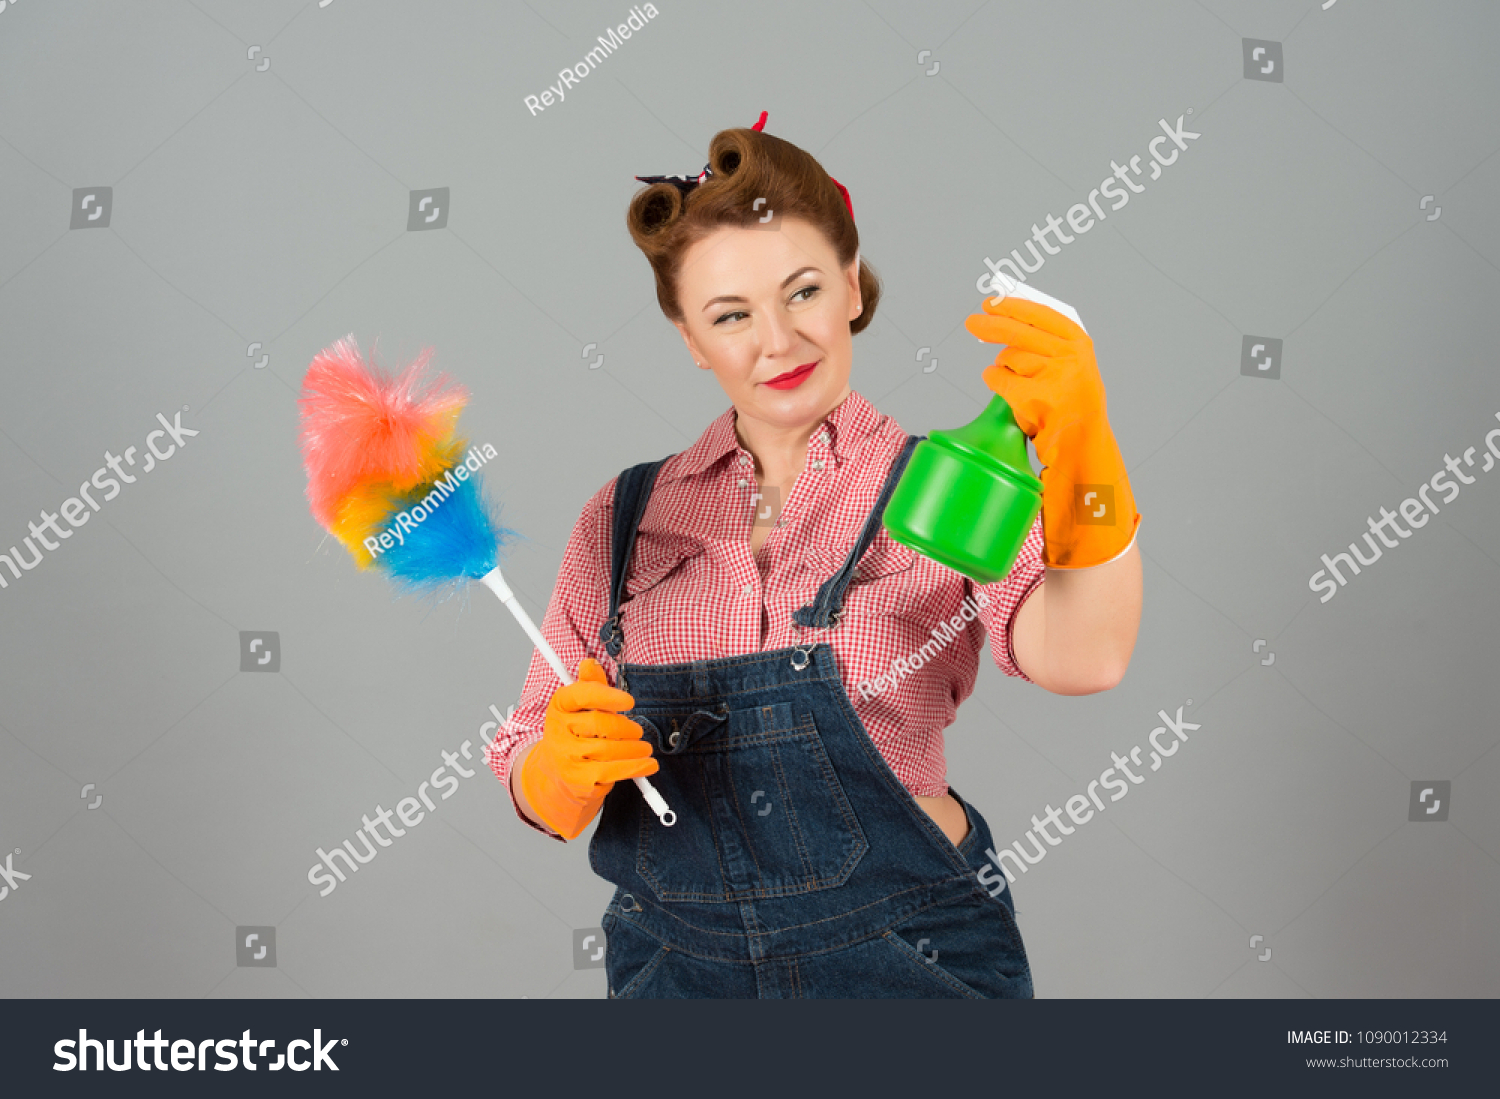 Cleaning Service Pinup Style Cleaning Woman Stock Photo 1090012334 ...